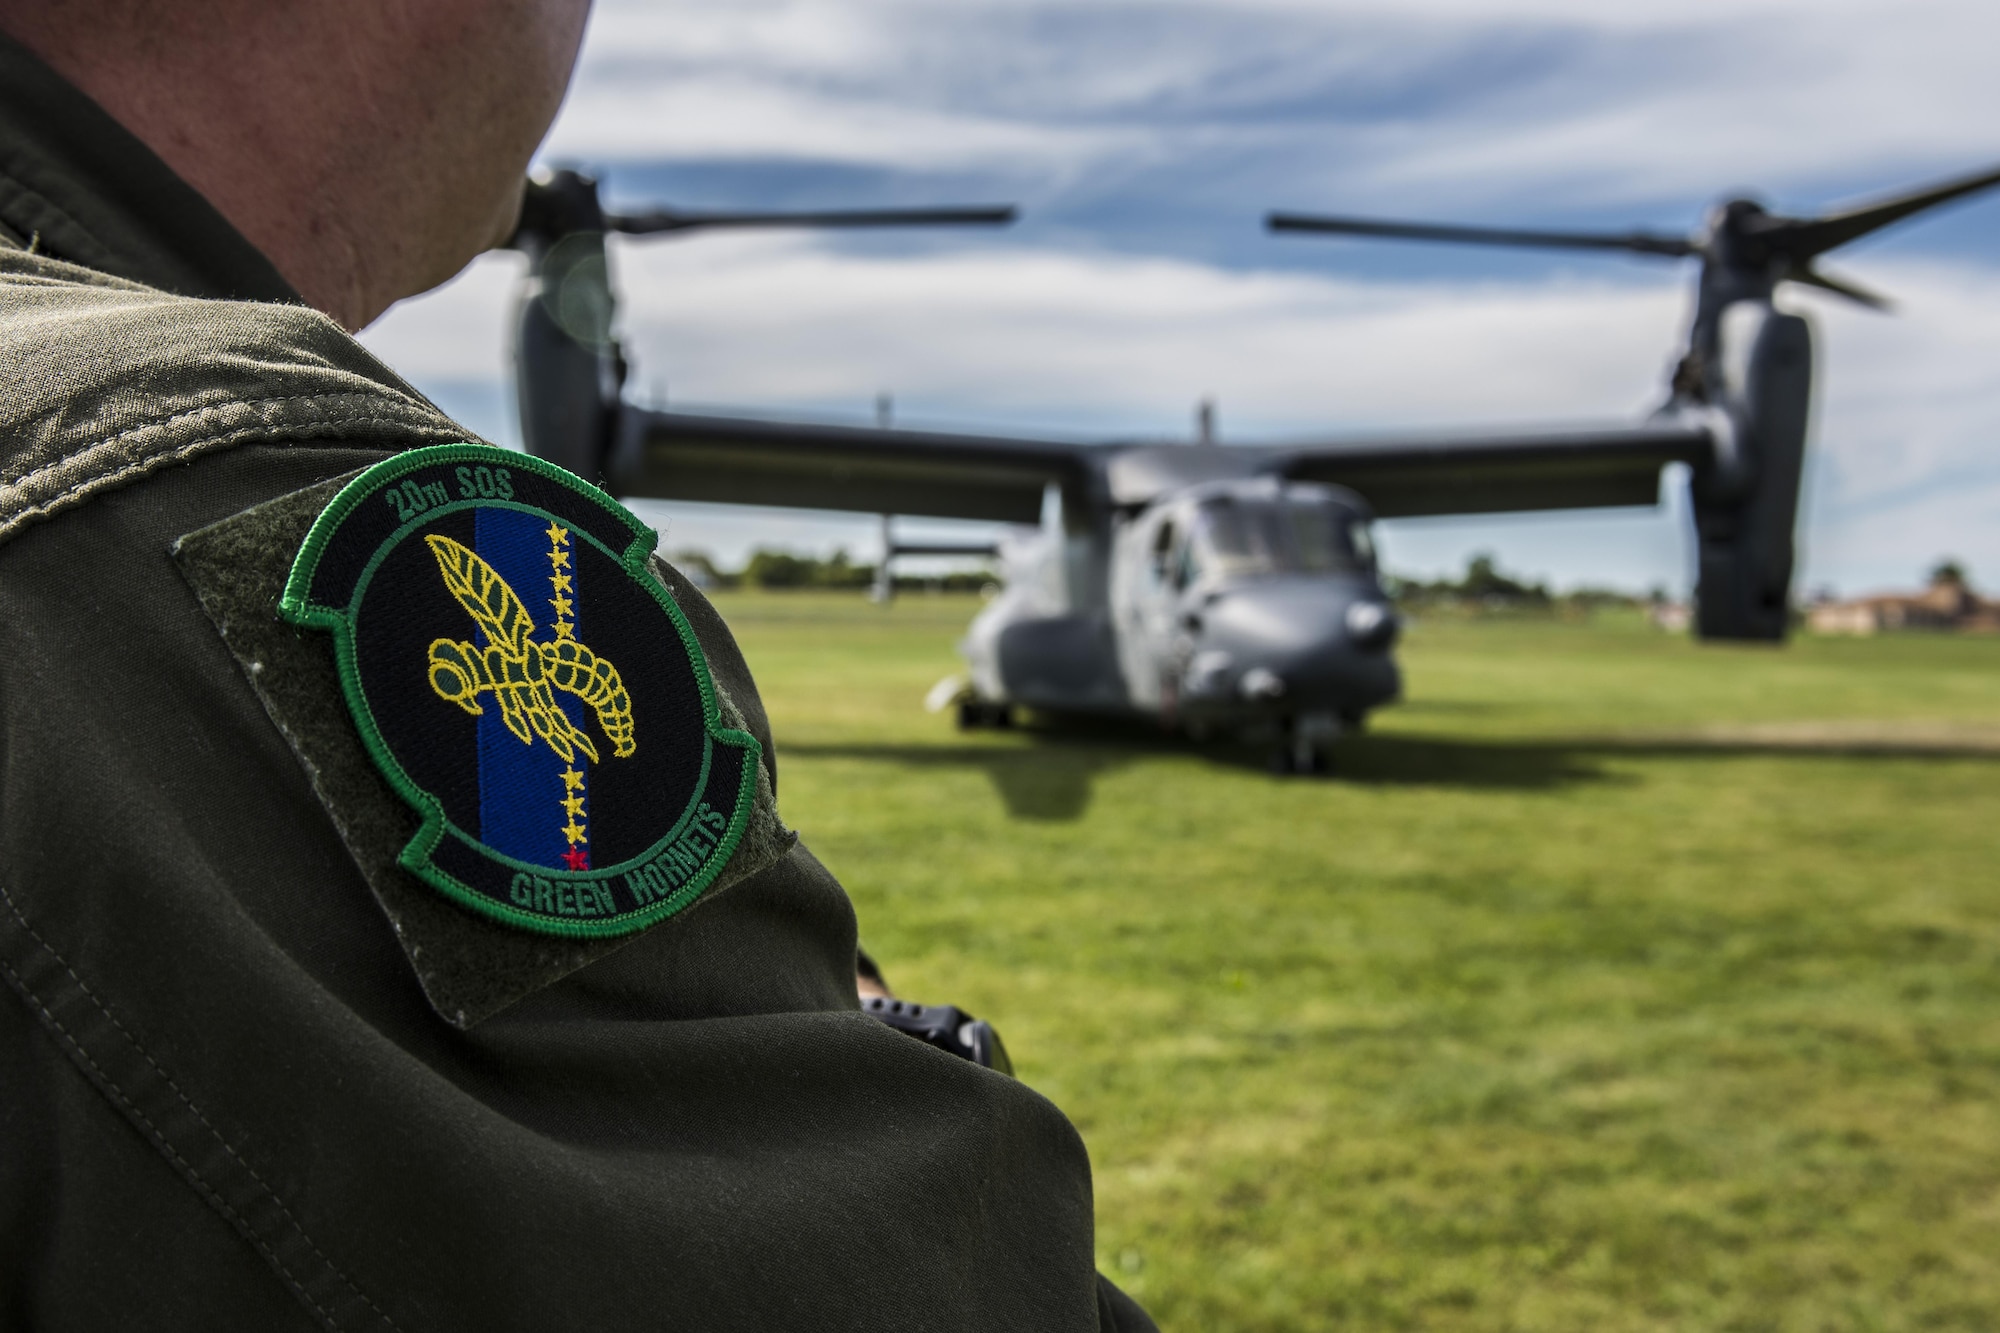 The 20th Special Operations Squadron patch is displayed on the arm of an Airman after the Green Hornet Dedication ceremony at the National Museum of the United States Air Force near Wright-Patterson Air Force Base, Ohio, Sept. 15, 2016. Current 20th SOS members were able to meet veterans of the same squadron and share their experiences. (U.S. Air Force photo by Senior Airman Luke Kitterman/Released)